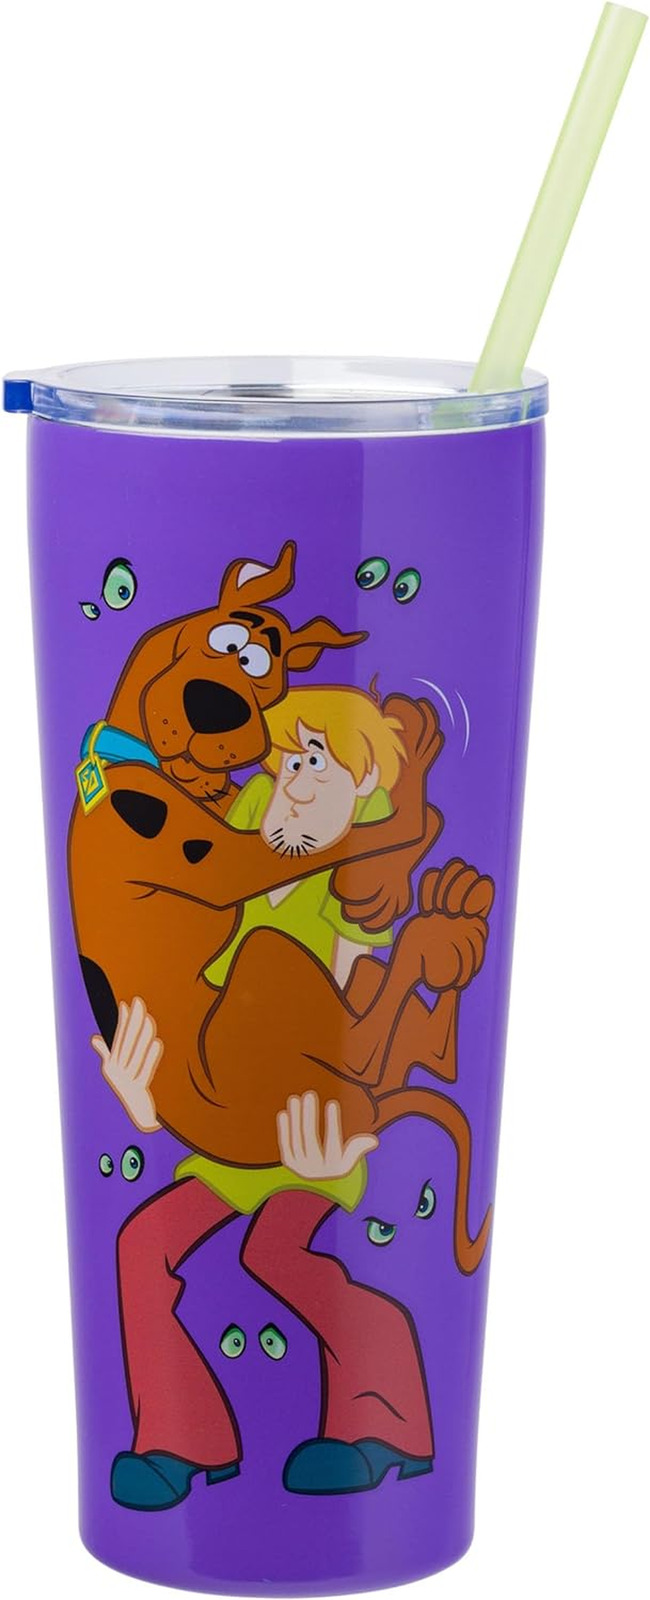 Scooby Doo Where Are You Double Walled Stainless Steel Tumbler with Straw, 22 Ou